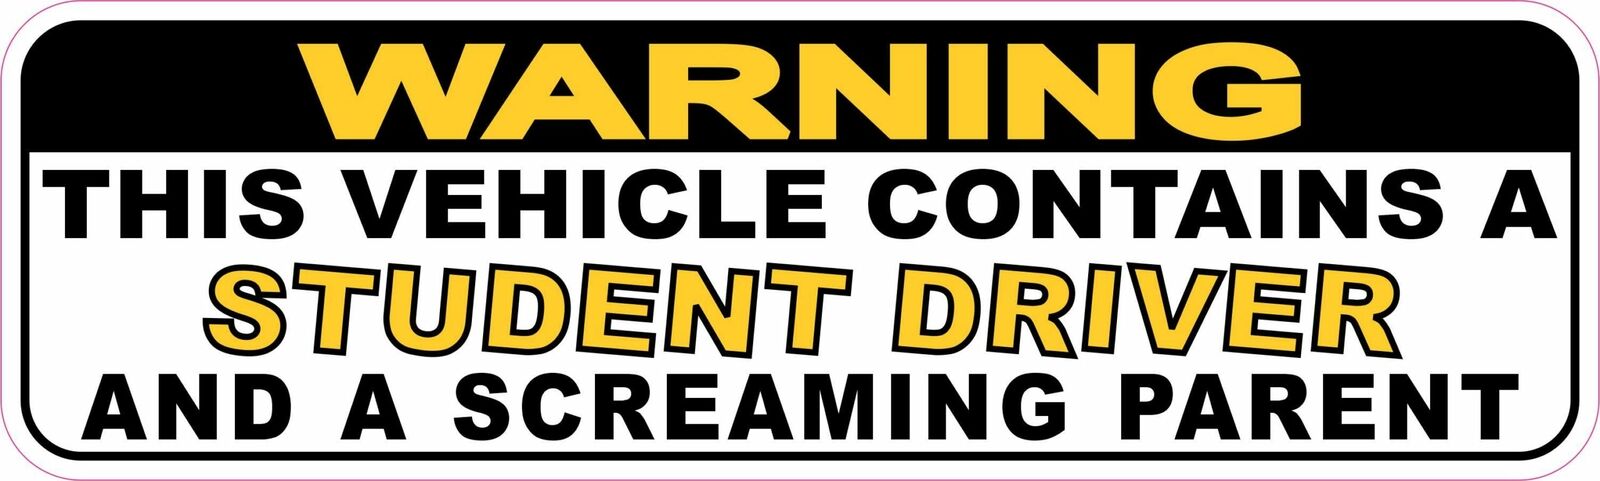 10in x 3in Warning Screaming Parent and Student Driver Vinyl Sticker Bumper Sign